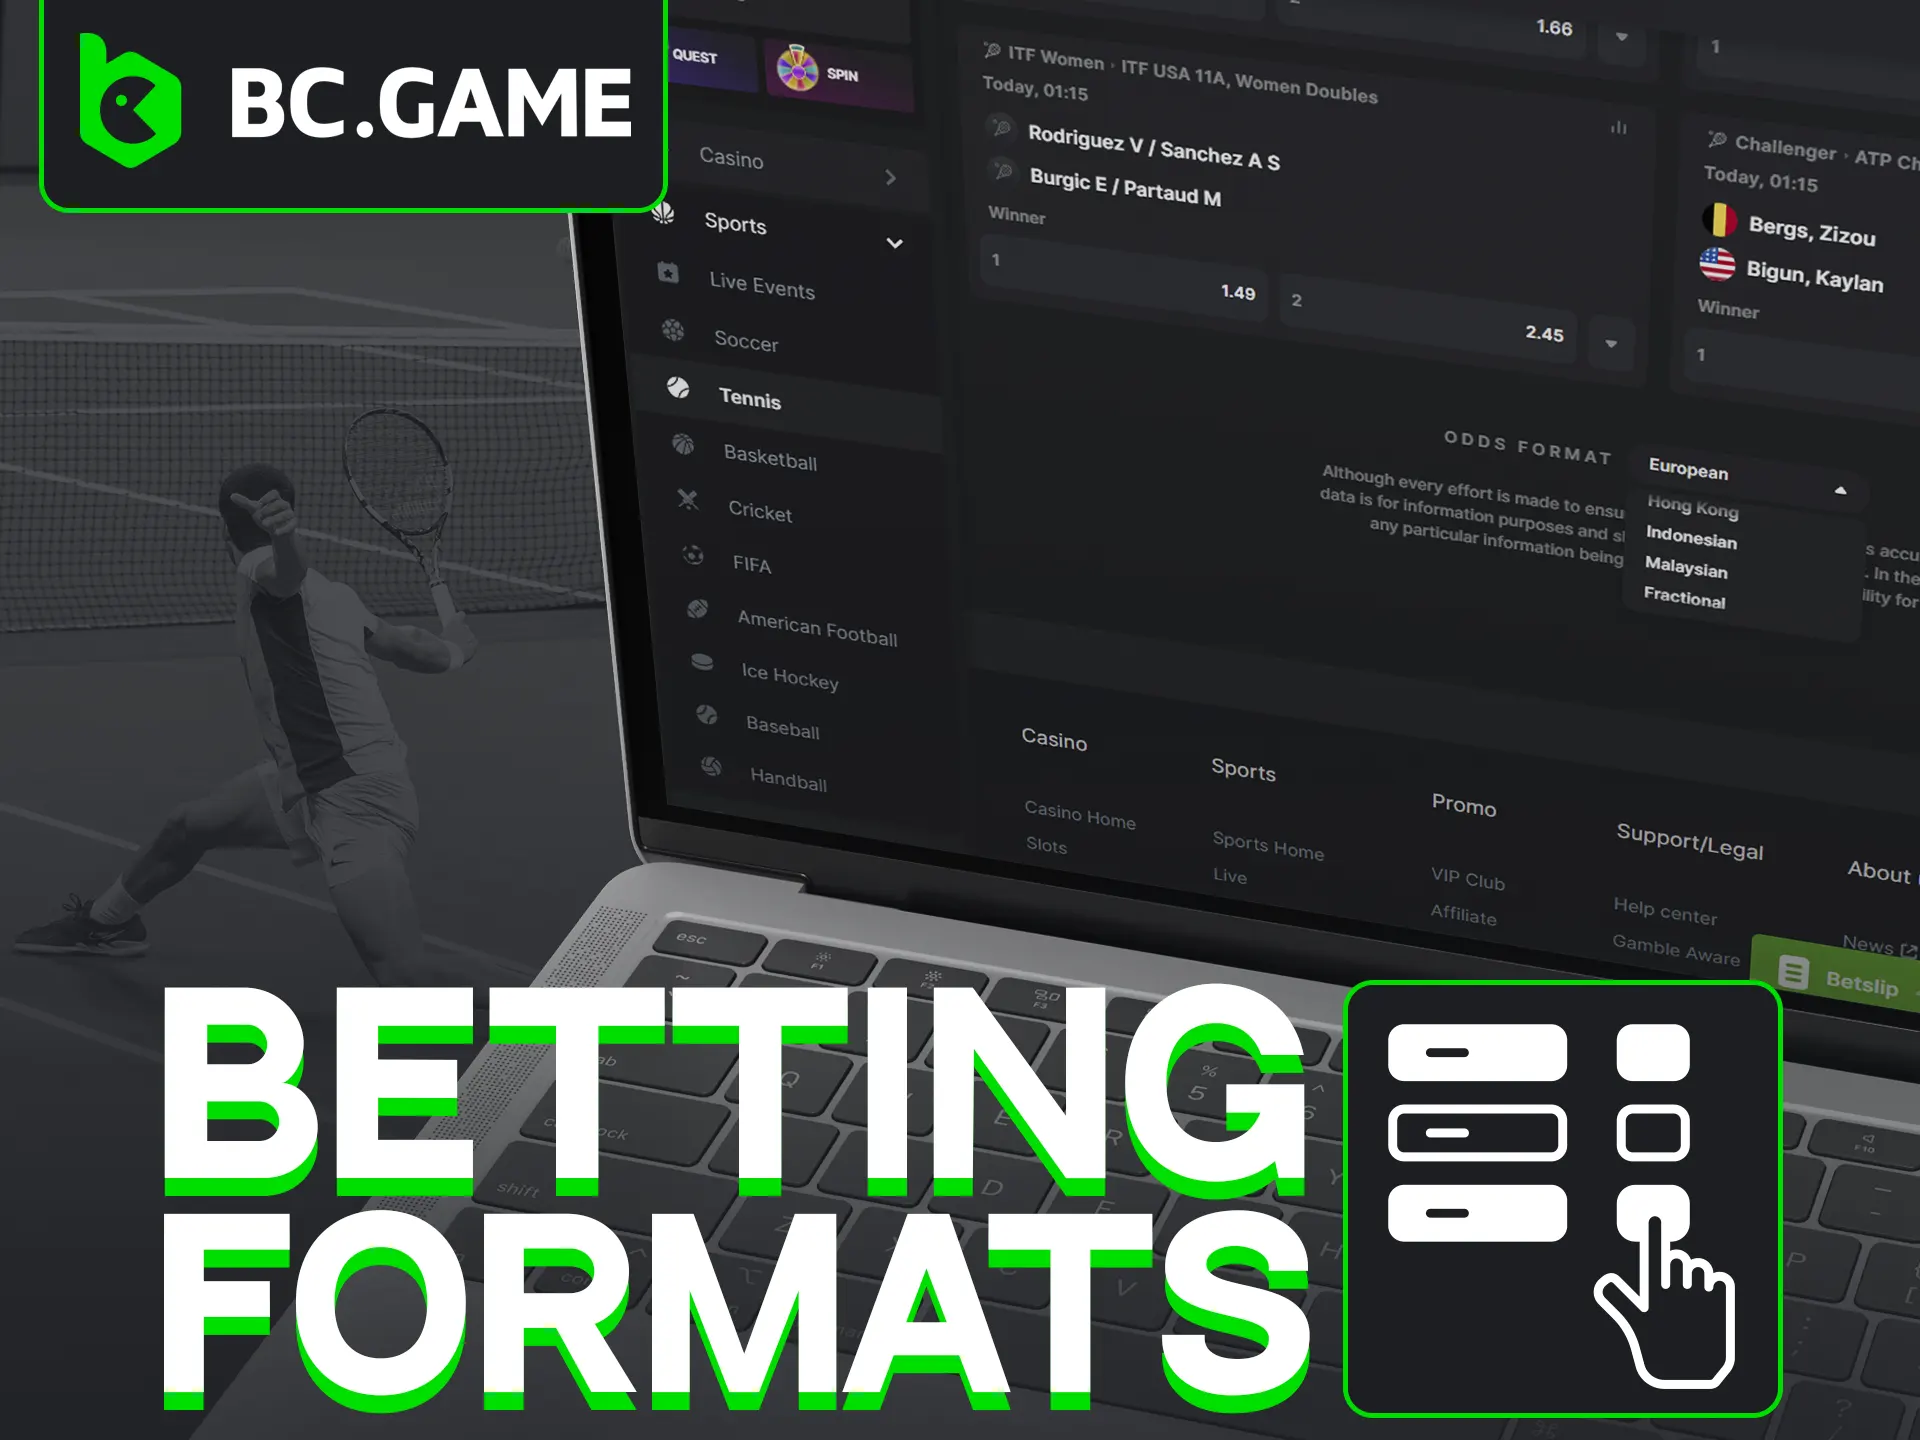 BC Game offers various tennis betting odds formats for profit.